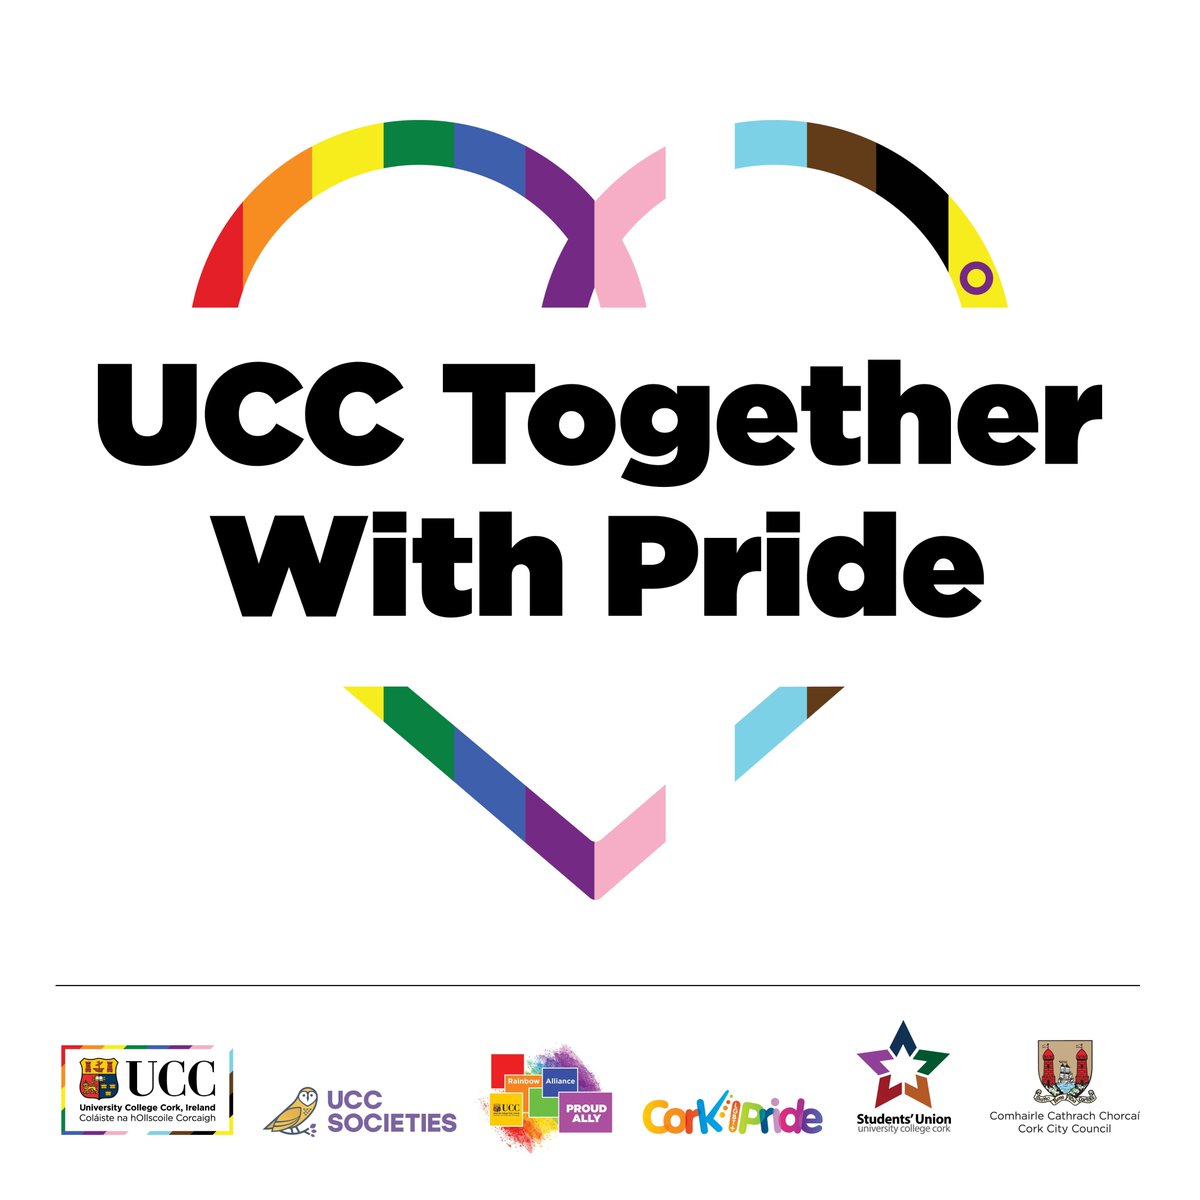 We're delighted to announce our events to celebrate @corkpride 2023. 

Join @UCCEquality and @UCCSU for events that mark the importance of pride as a protest.

ucc.ie/en/news/2023/u… 🏳️‍⚧️🏳️‍🌈#CorkPride #UCCTogetherwithPride #UCCLeCheileleBród